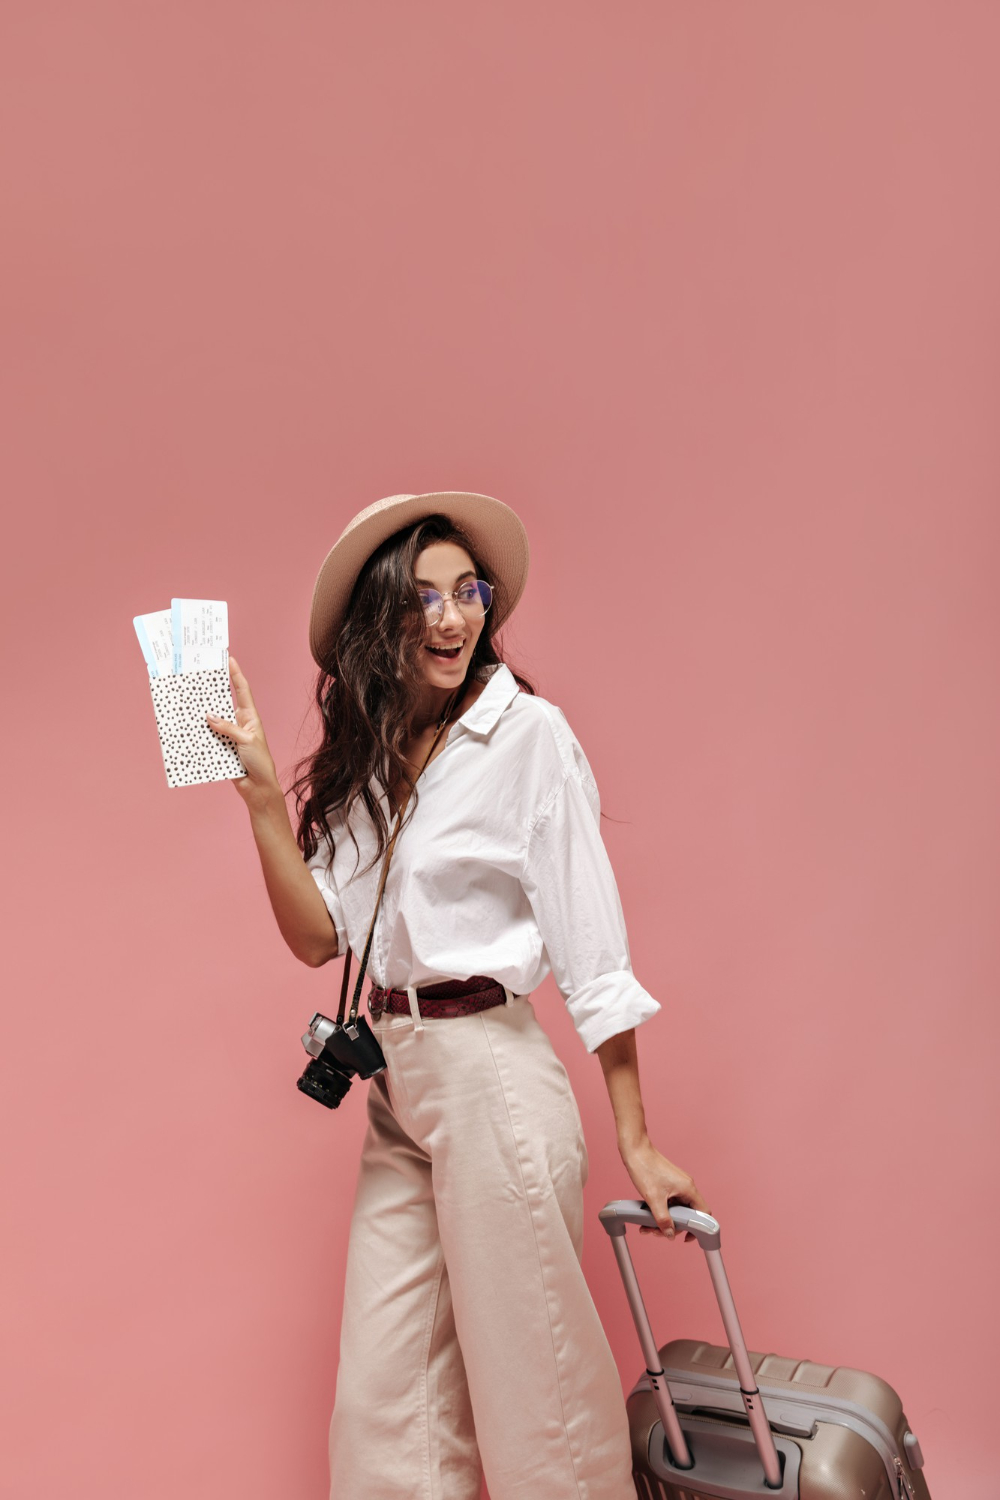 curly-cute-lady-with-brunette-hair-white-wide-sleeve-shirt-beige-pants-modern-belt-stylish-eyeglasses-posing-with-plane-tickets